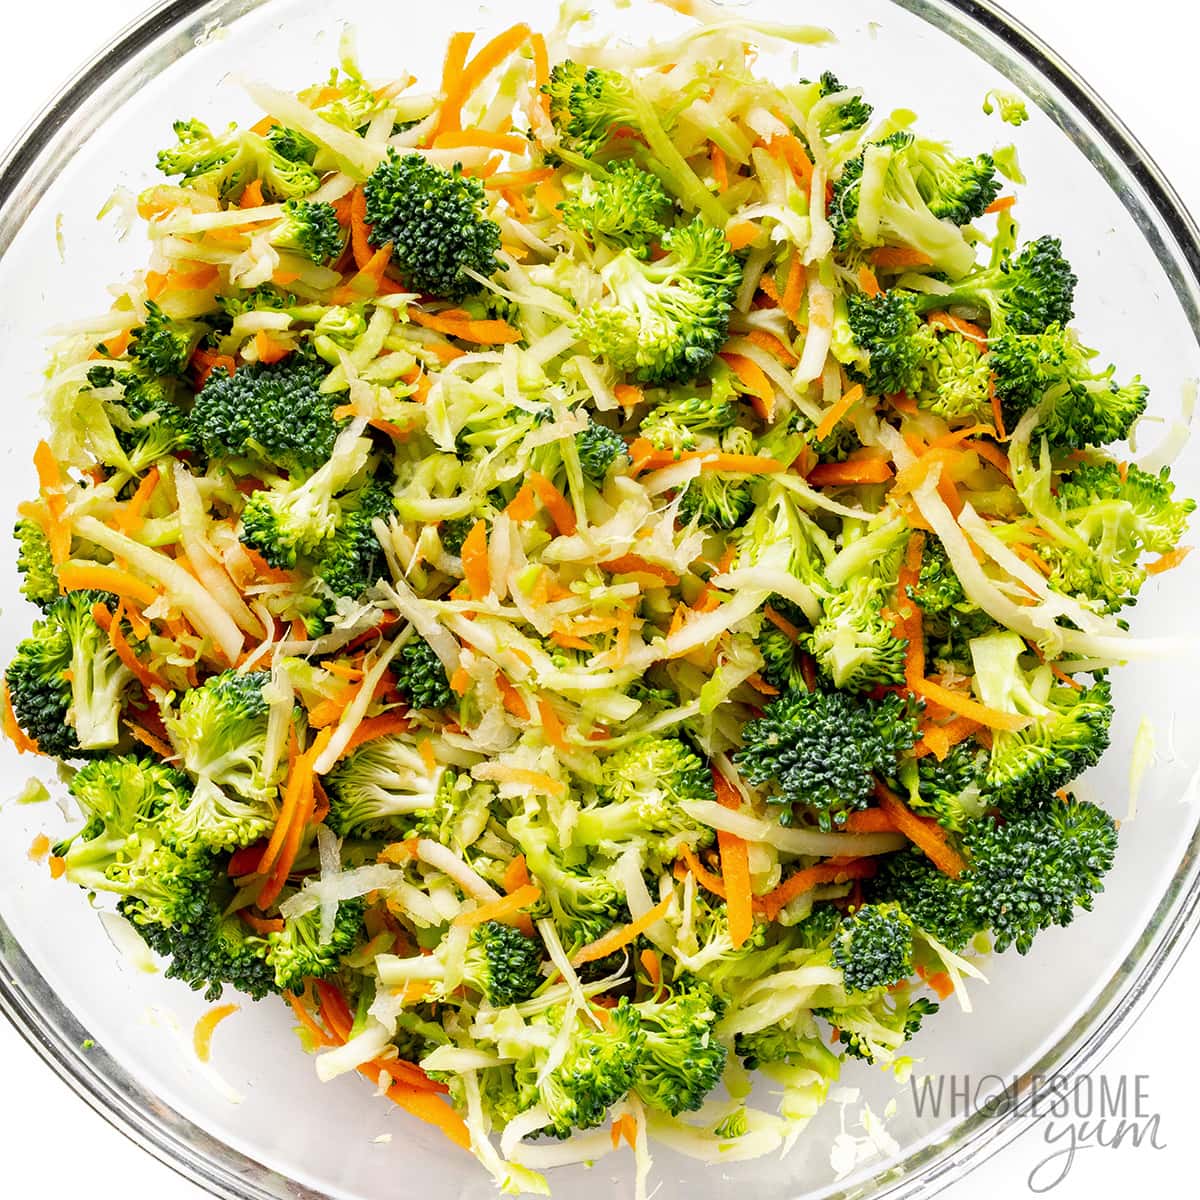 Veggies without dressing in a bowl.